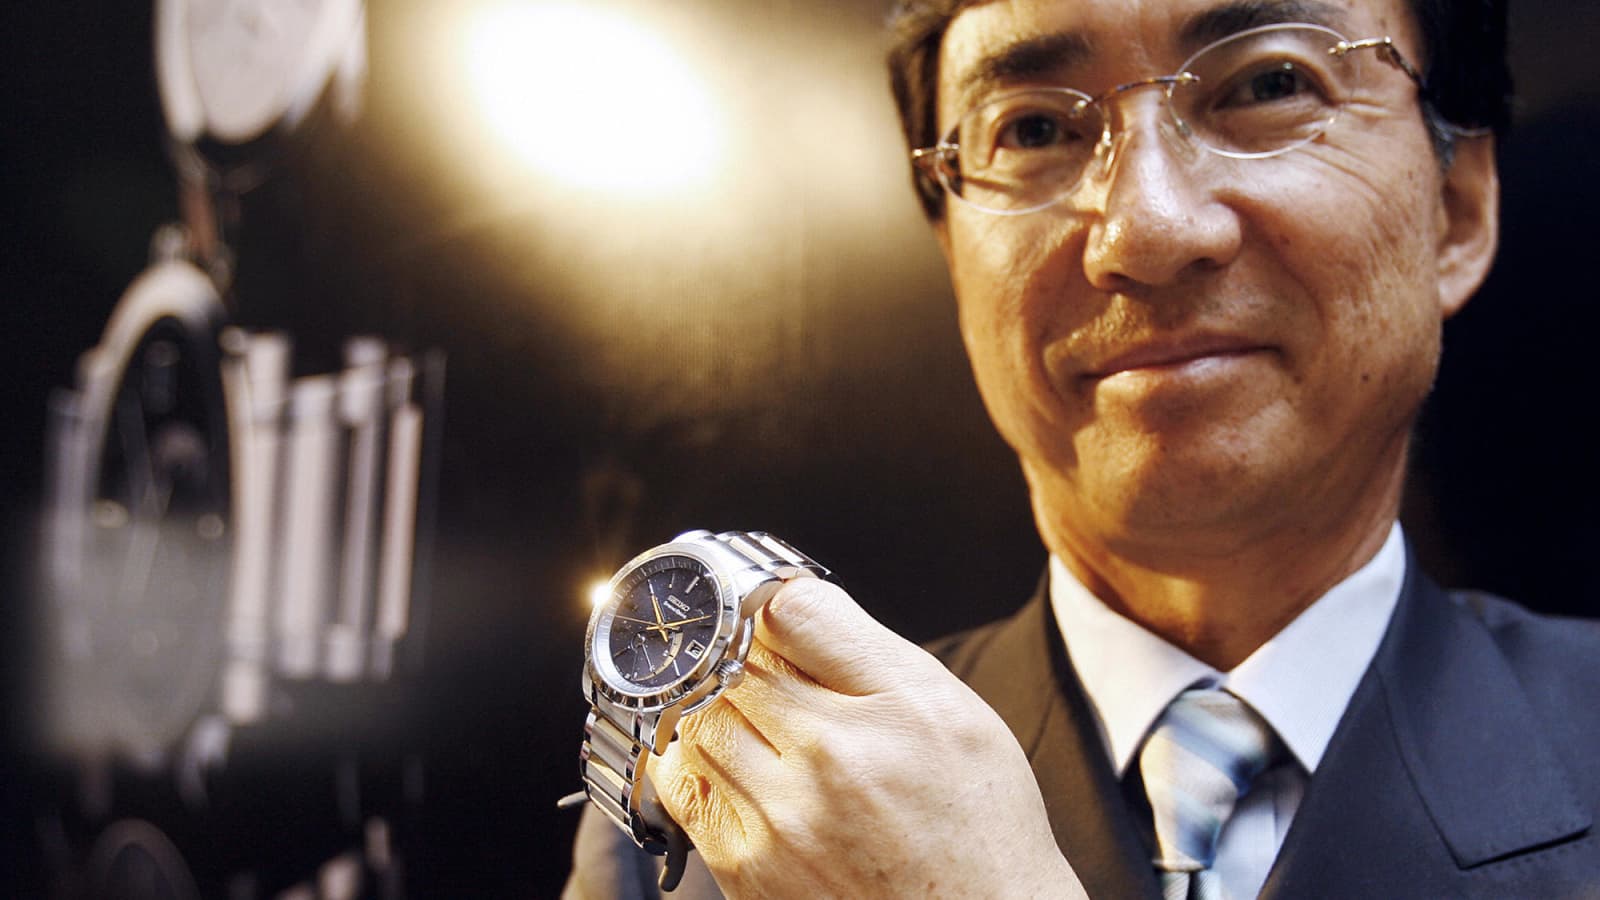 Japan watch giant Seiko sued for alleged bias against Japanese woman